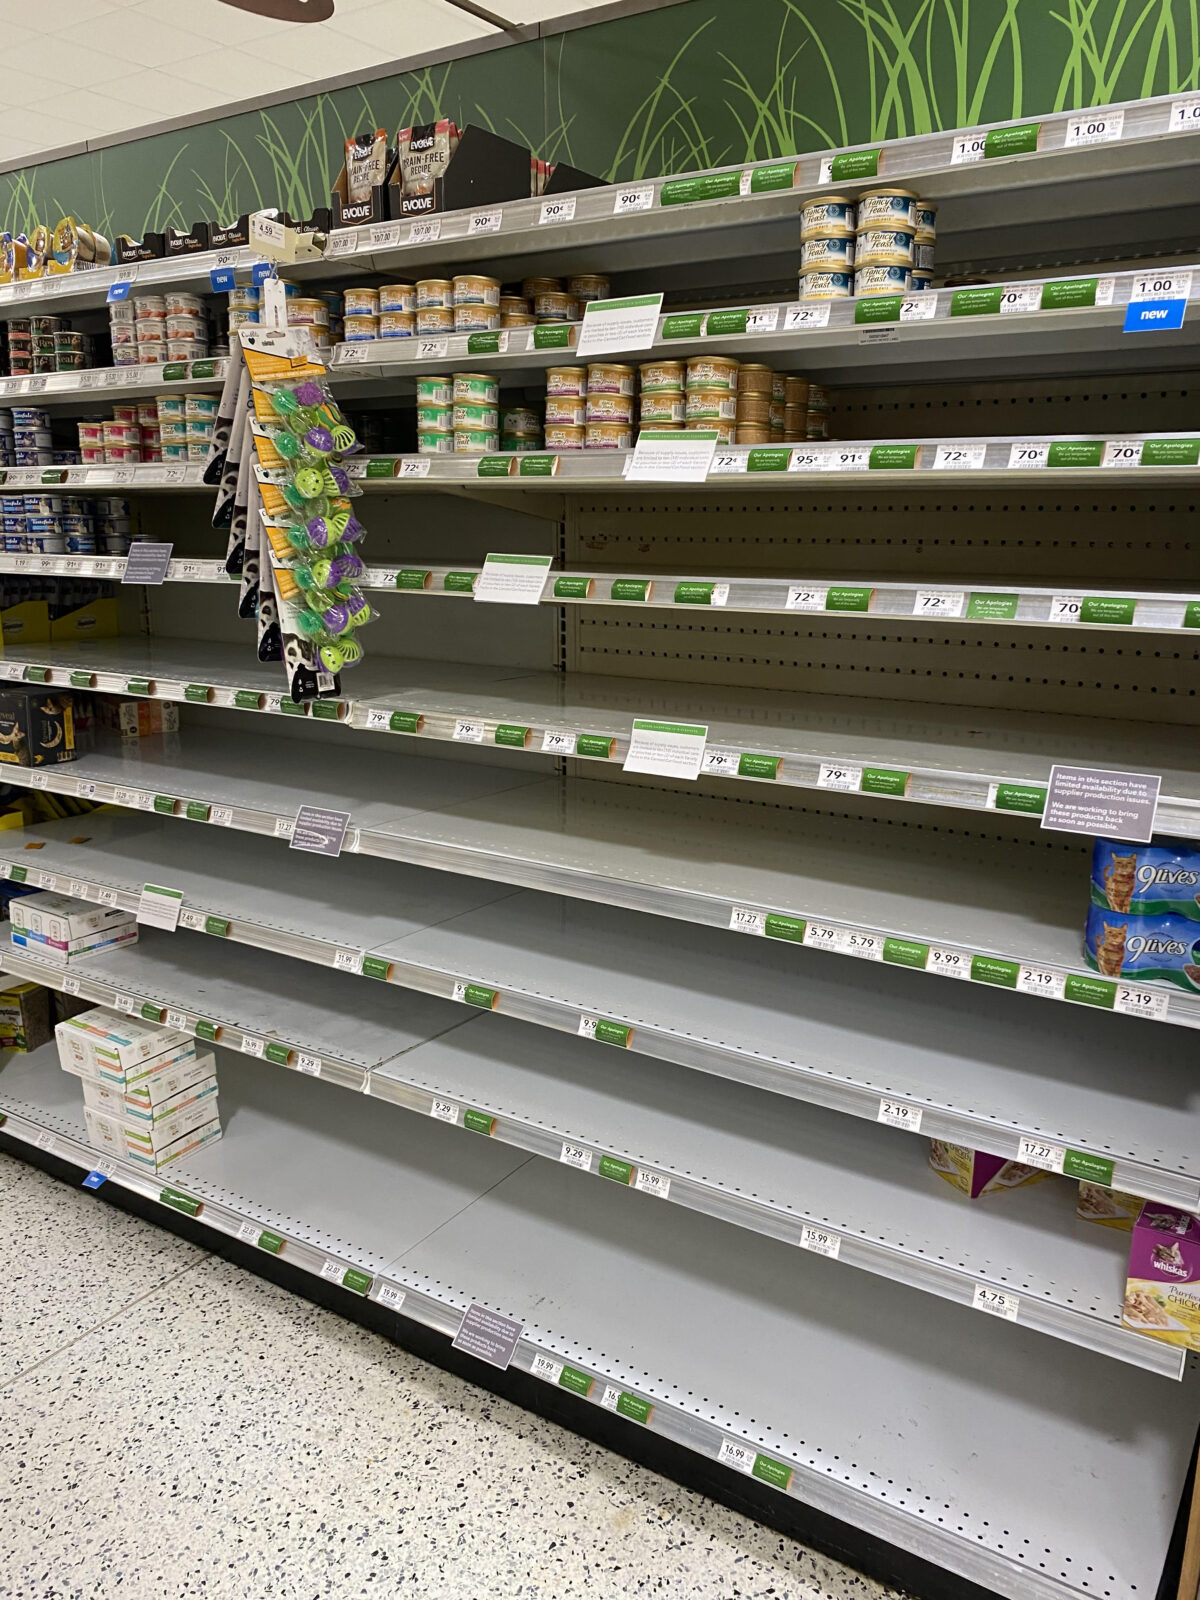 During the peak of what shelter staff refer to as "cat season," grocery stores like Publix, located in Hernando County, Florida are running low on cat food.